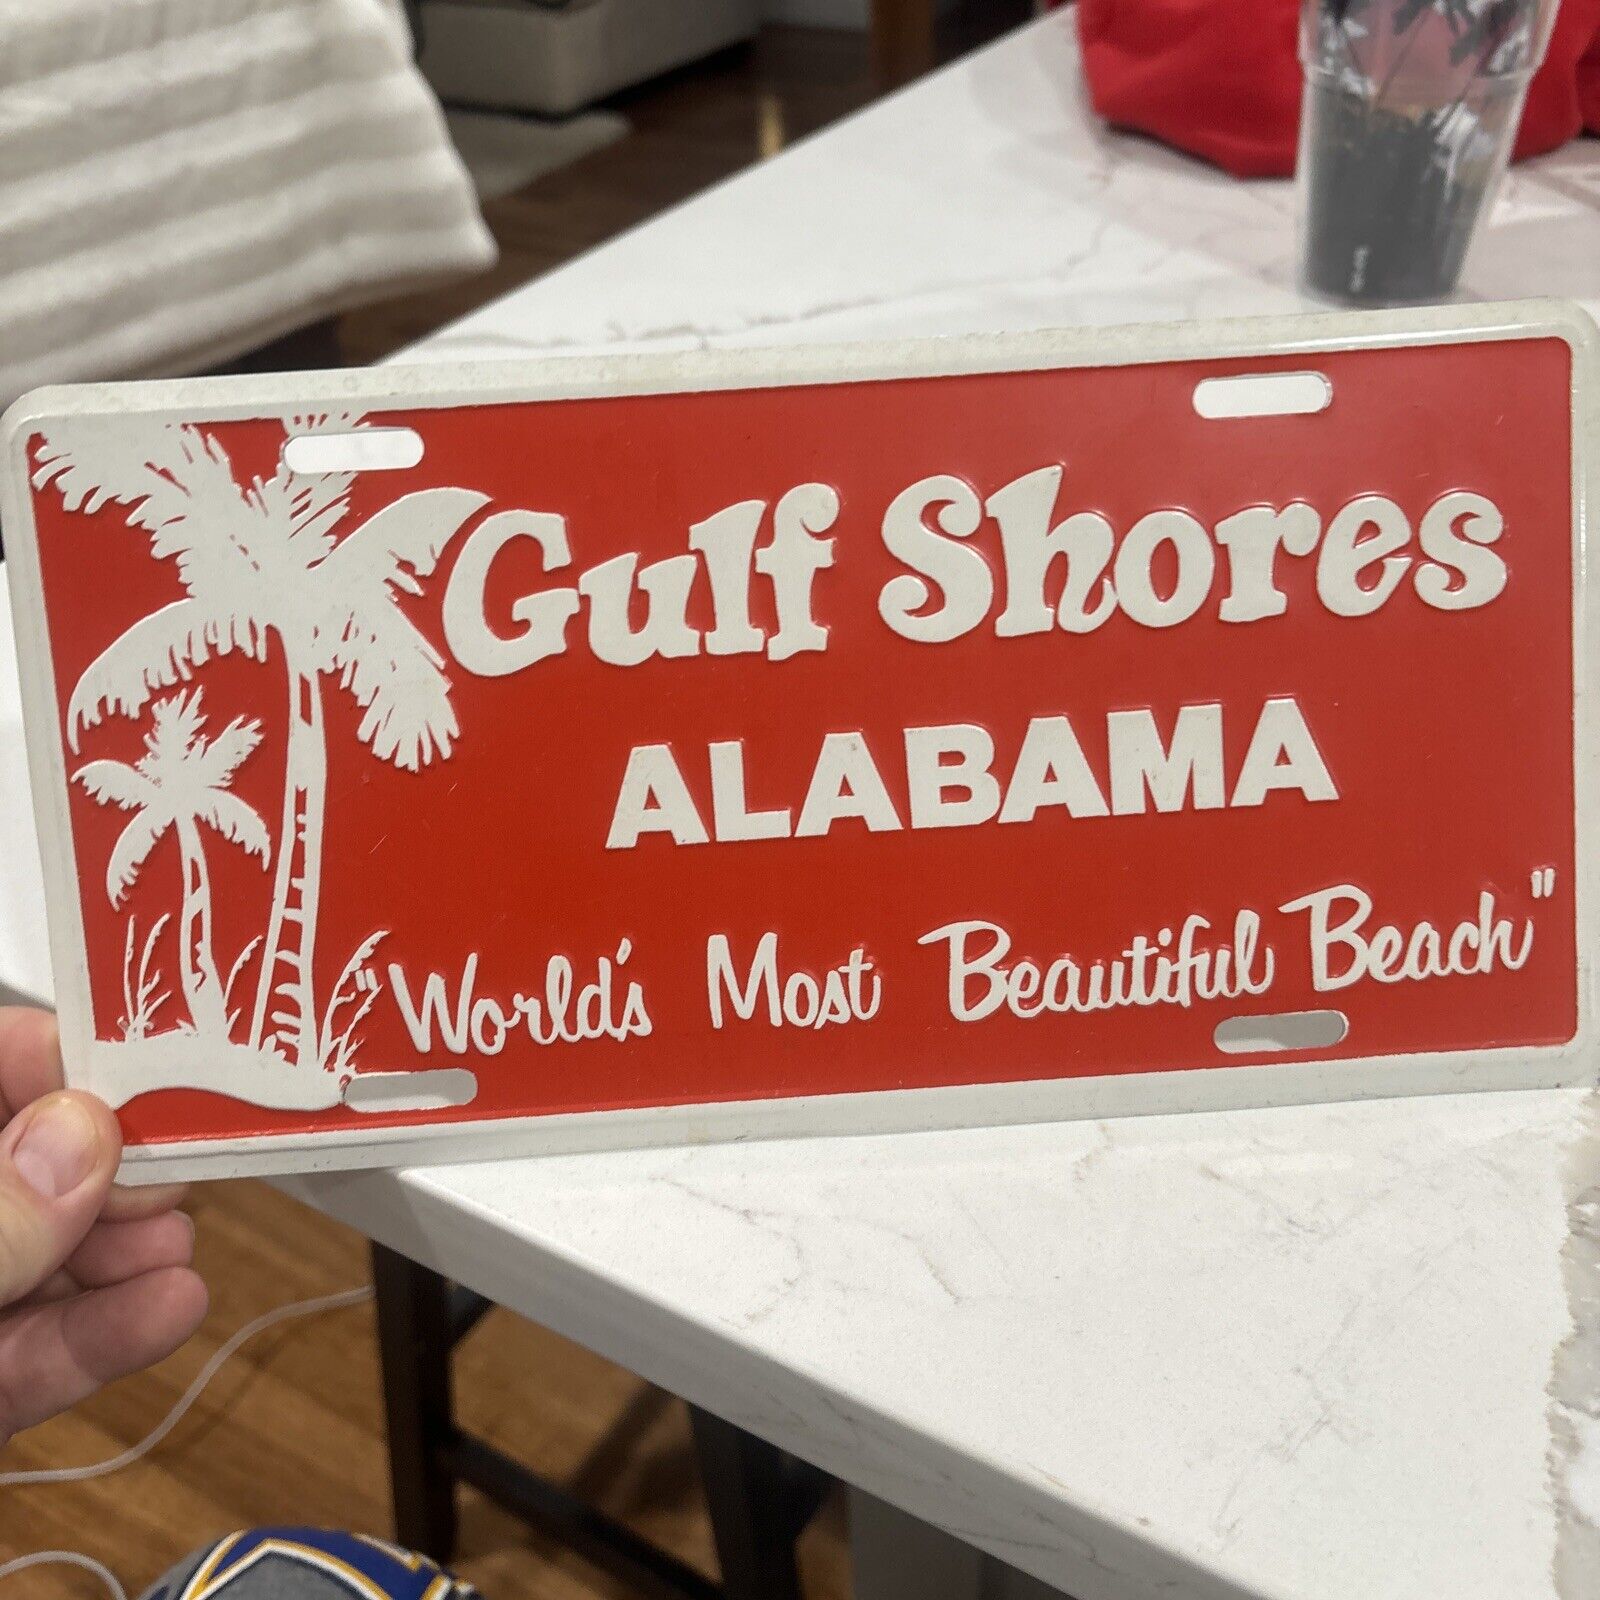 Vintage Metal License Plate Gulf Shores Alabama “Worlds Most Beautiful Beach”